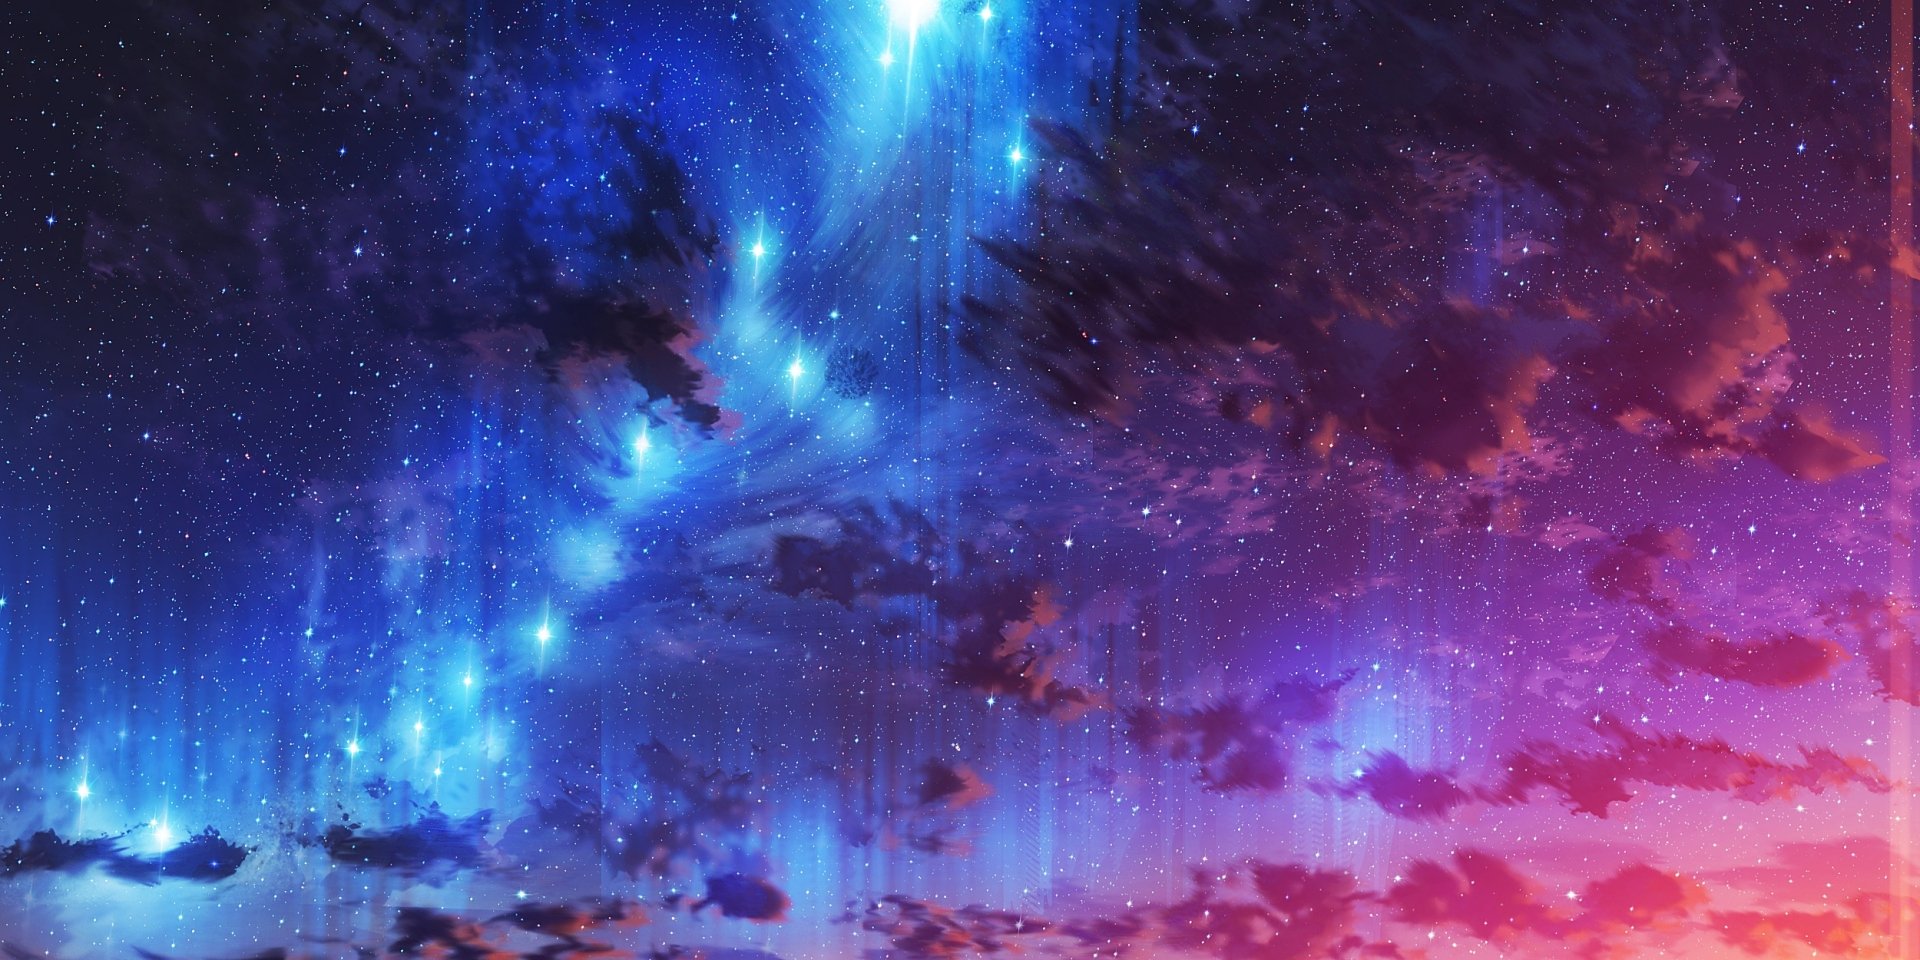 Download Starry Sky Anime Original HD Wallpaper by ナコモ